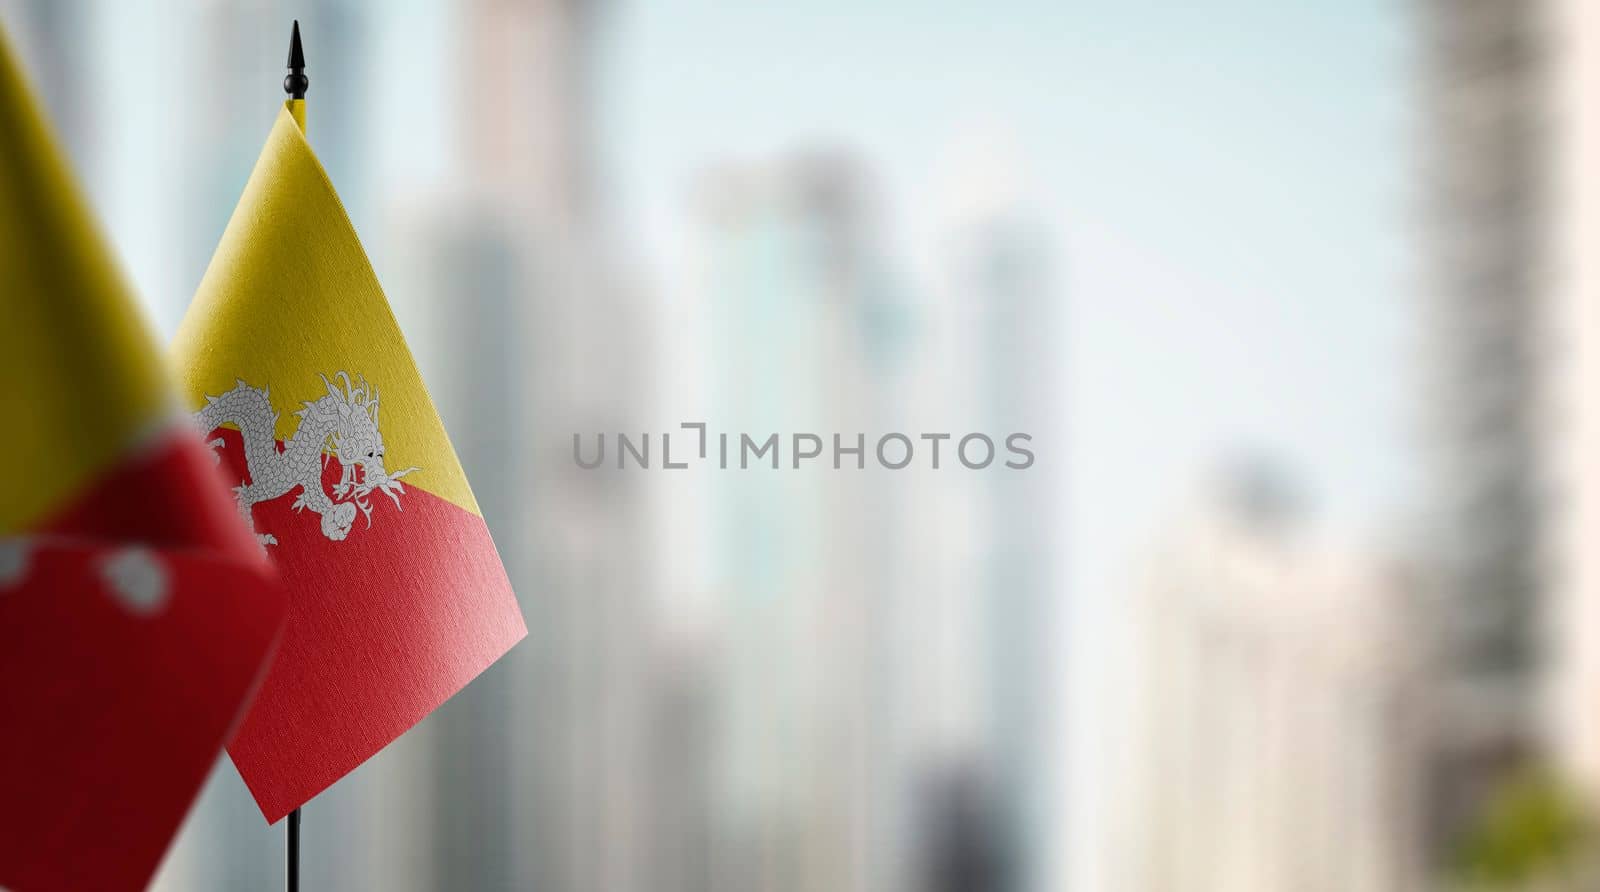 Small flags of the Bhutan on an abstract blurry background.